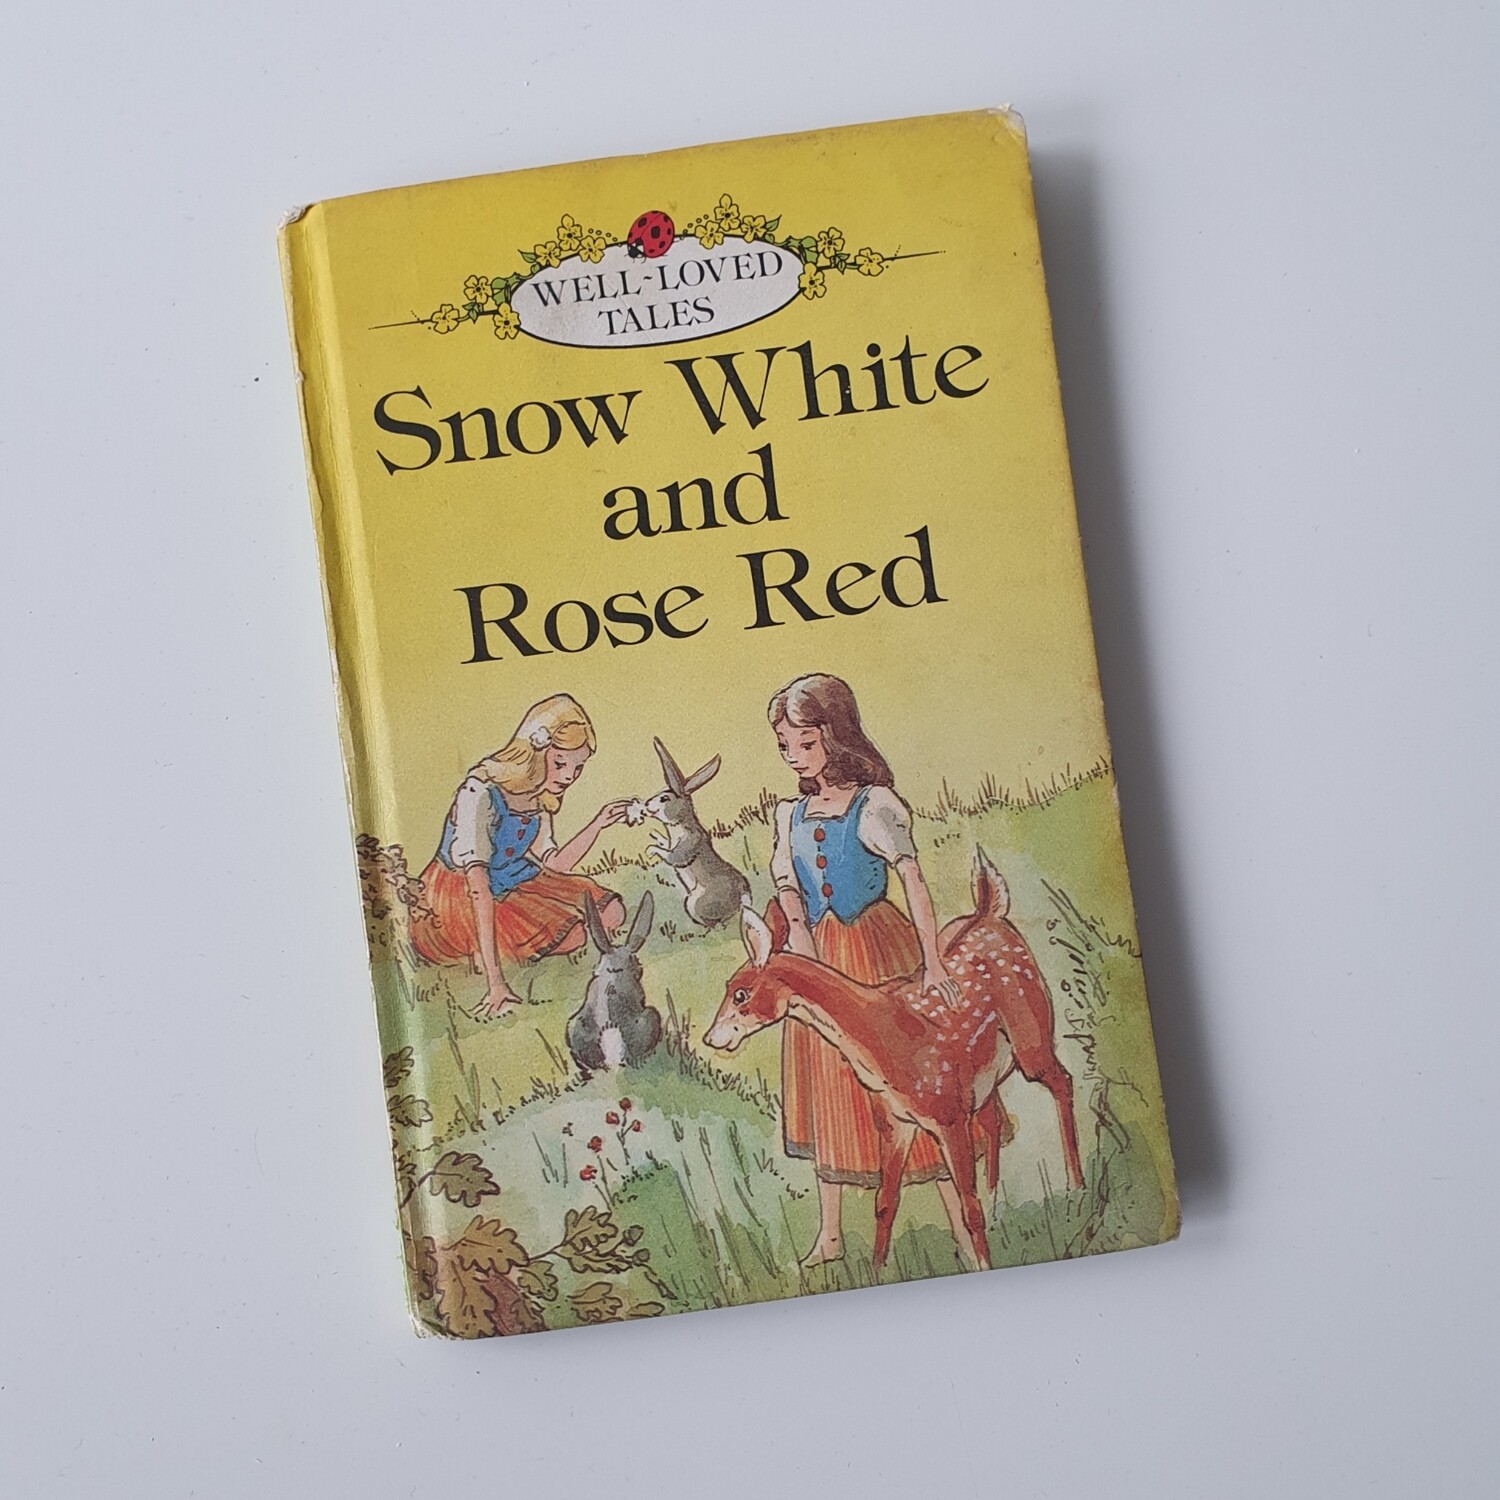 Snow White and Rose Red Notebook - Ladybird Book - Well Loved Tales